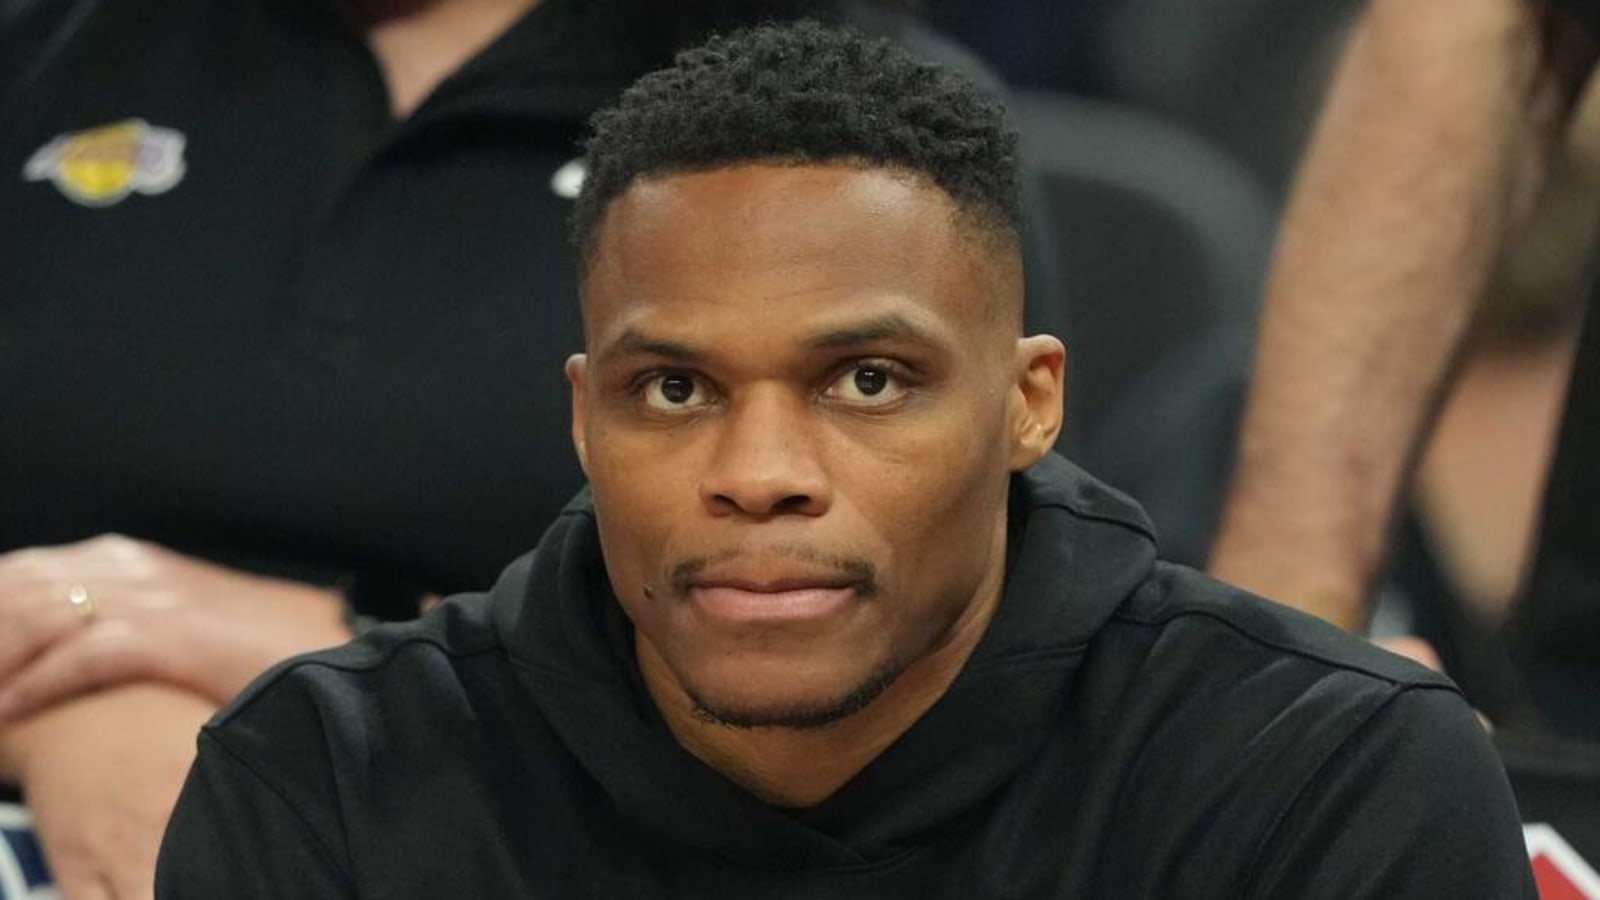 Report: Lakers PG Westbrook and longtime agent split over 'irreconcilable differences'